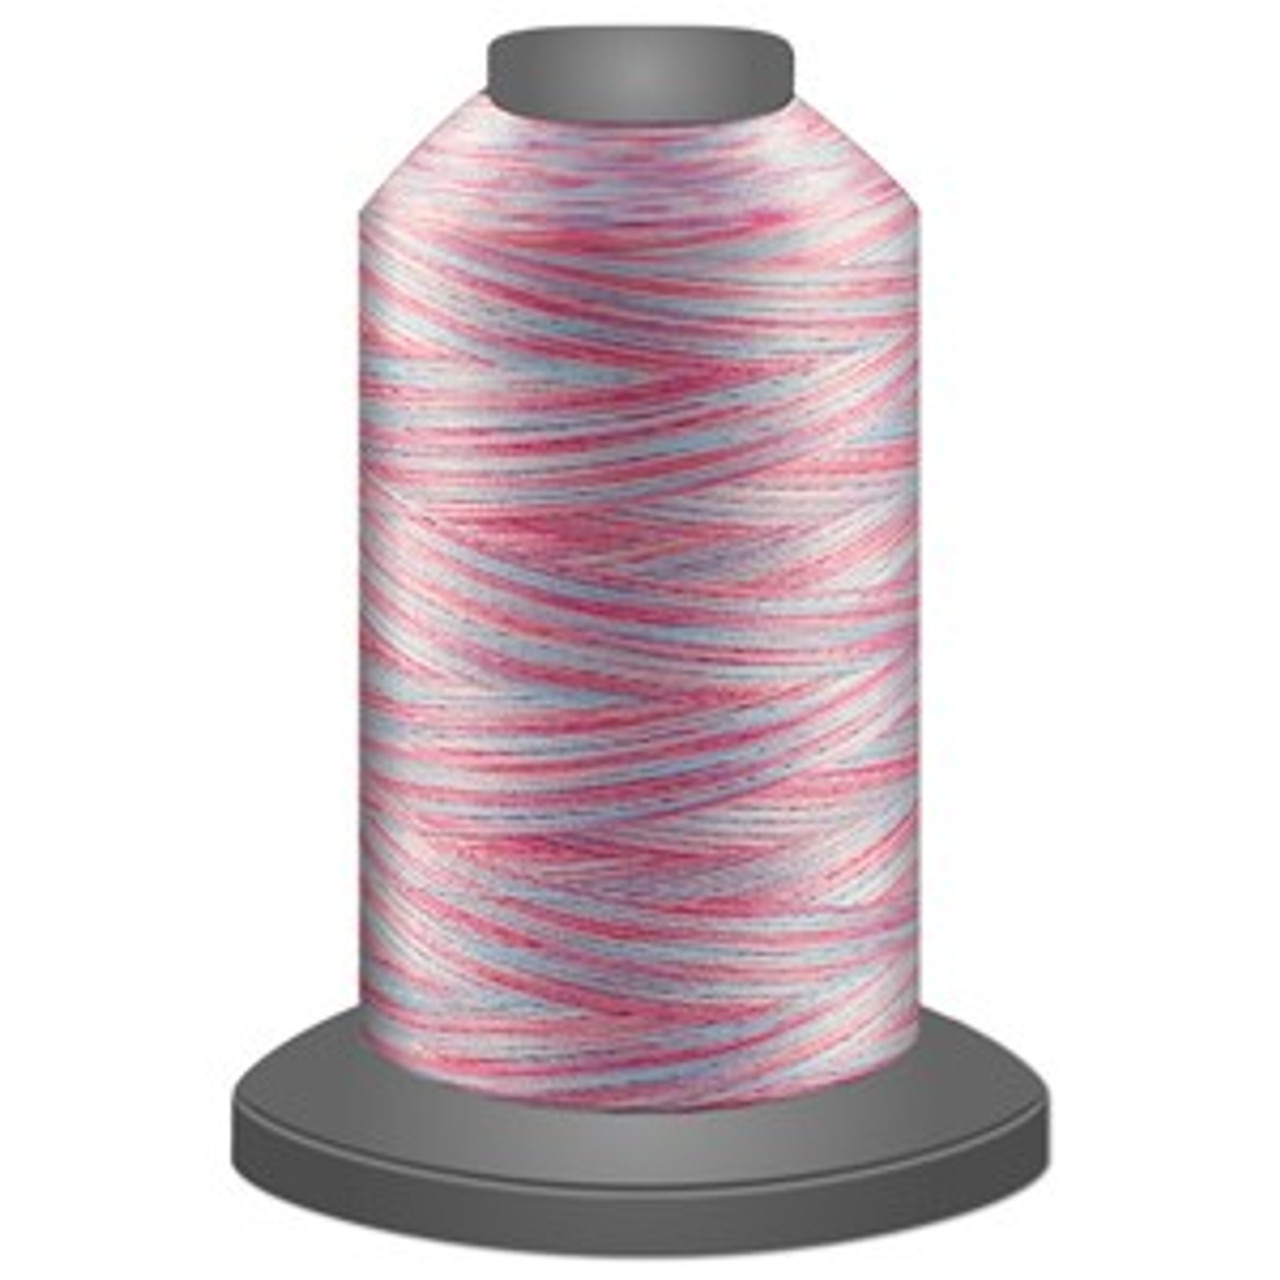 Affinity Variegated Thread, Baby Shower 60463